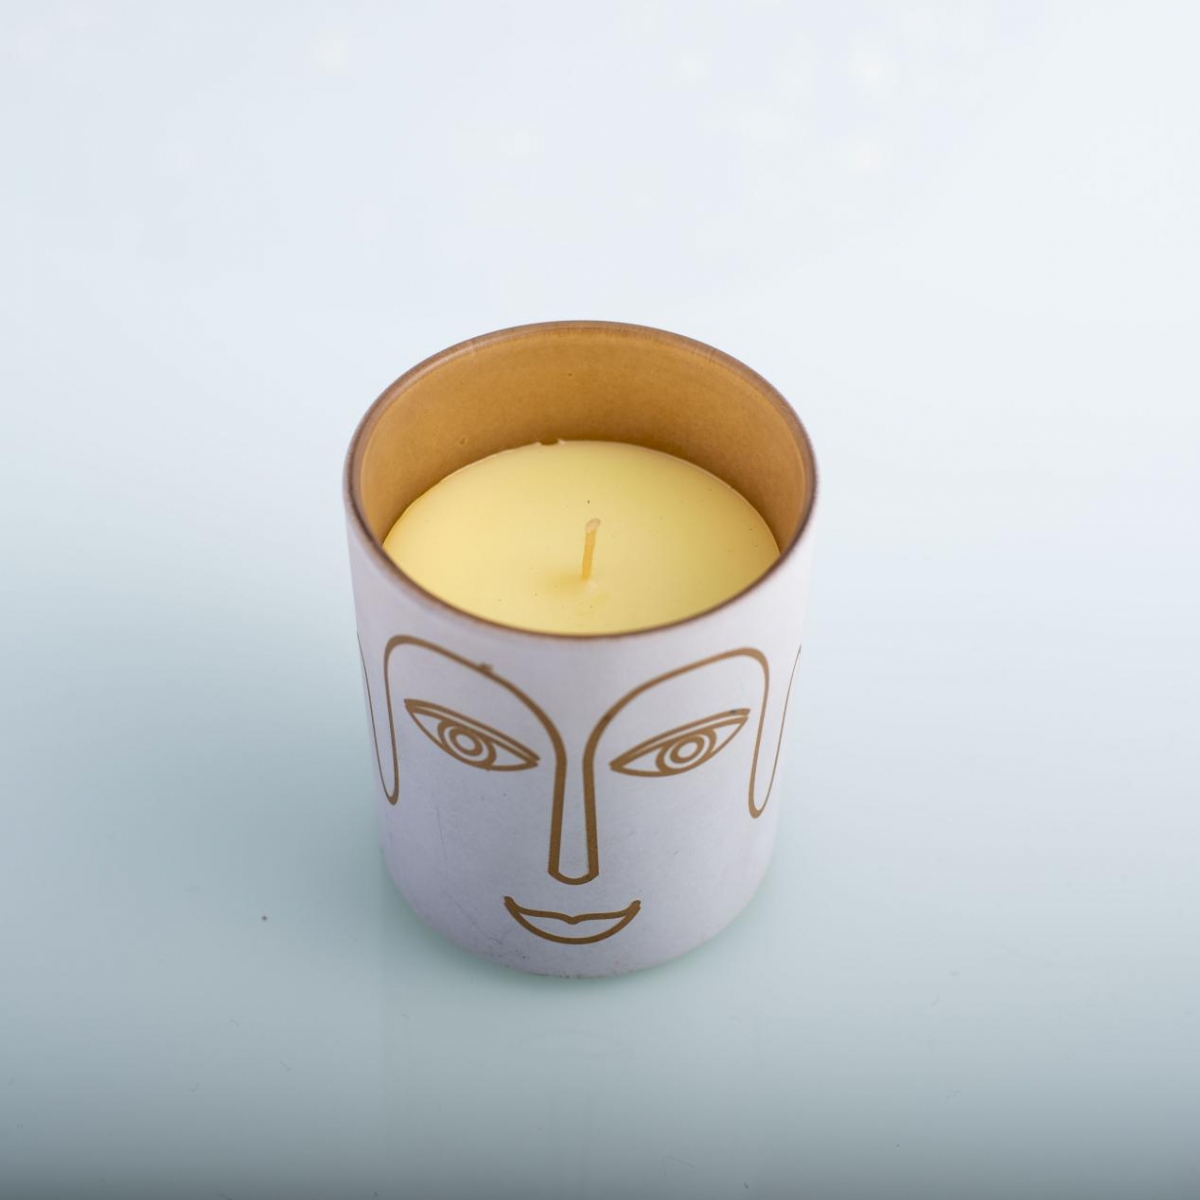 Scented Candles : Buddhism Meditation , White Glass Jar , China Factory , Best Price-HOWCANDLE-Candles,Scented Candles,Aromatherapy Candles,Soy Candles,Vegan Candles,Jar Candles,Pillar Candles,Candle Gift Sets,Essential Oils,Reed Diffuser,Candle Holder,